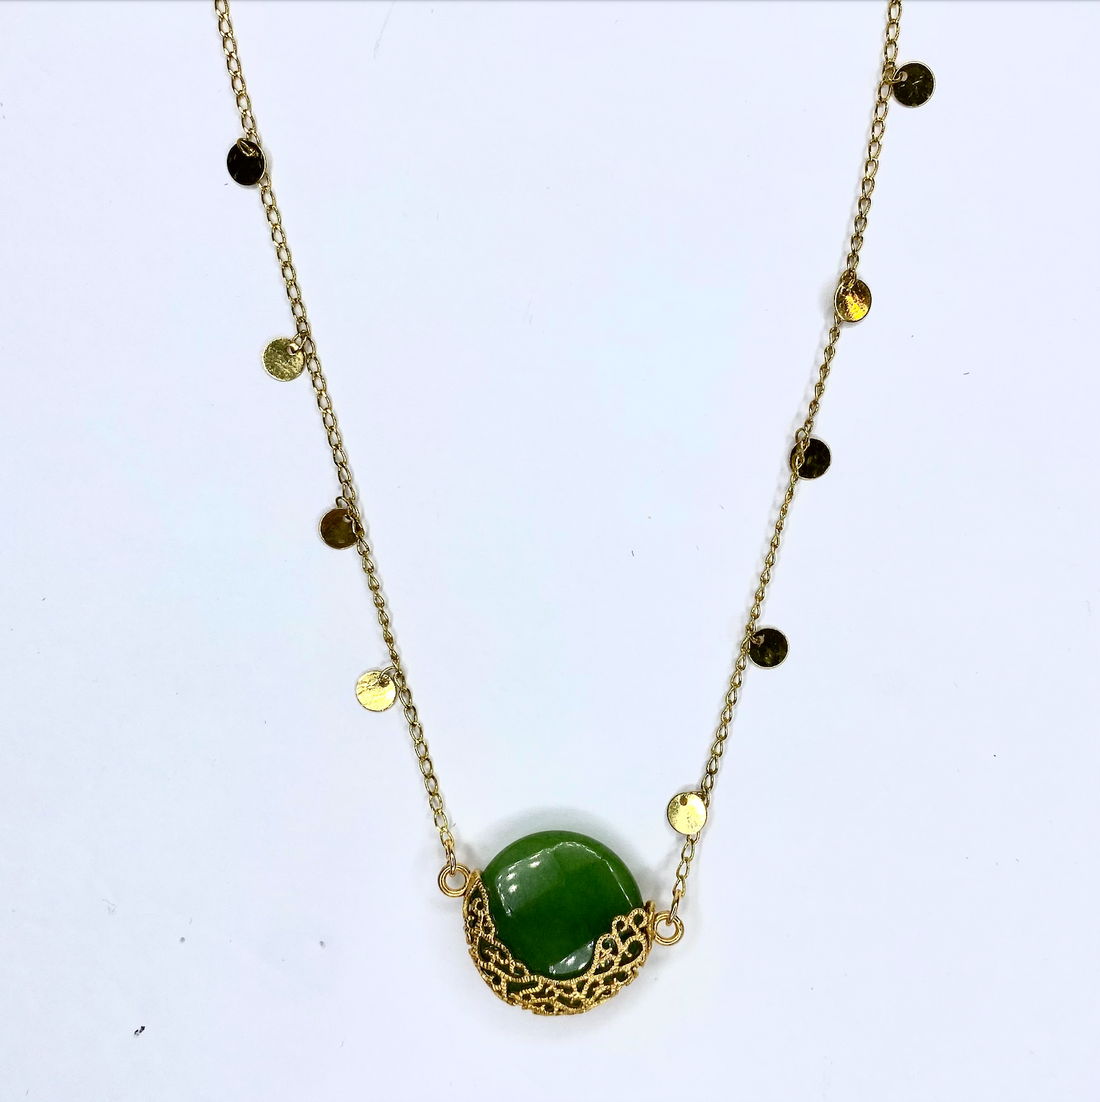 Gold Disc Chain with Gold Filigree and Green Gemstone Accent Necklace